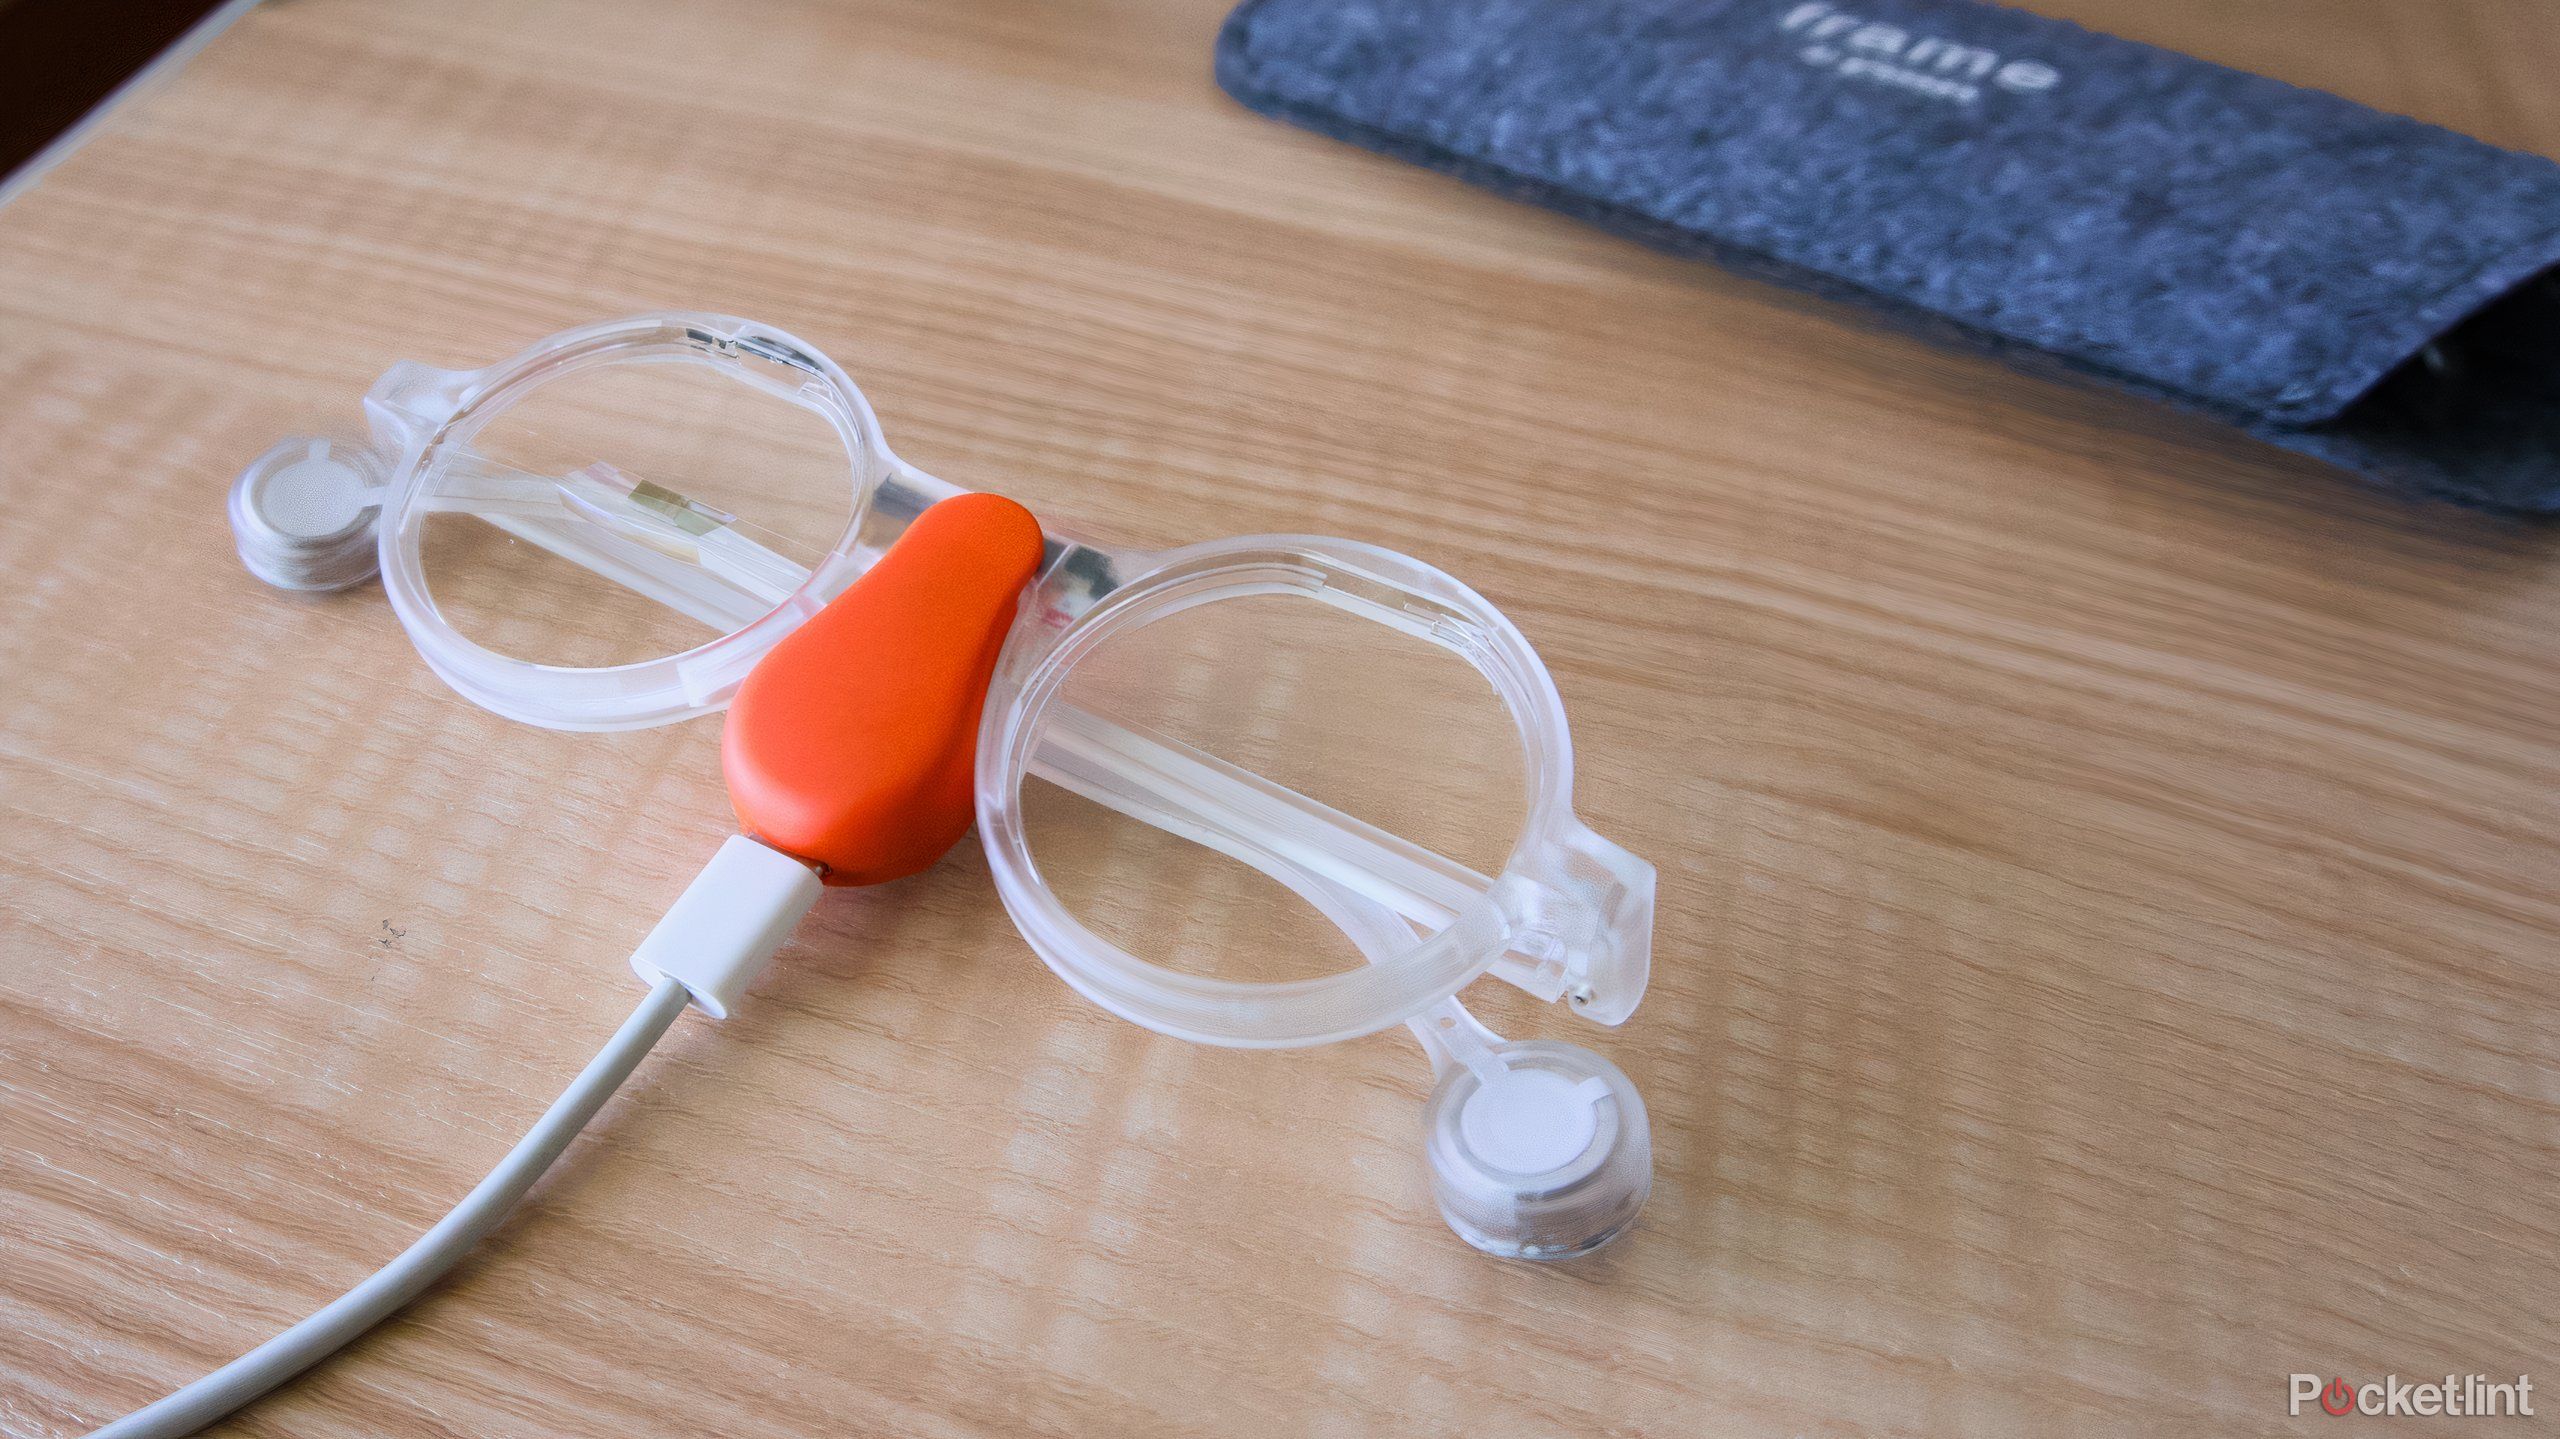 The Frame glasses charging on a orange Mister Power charger.